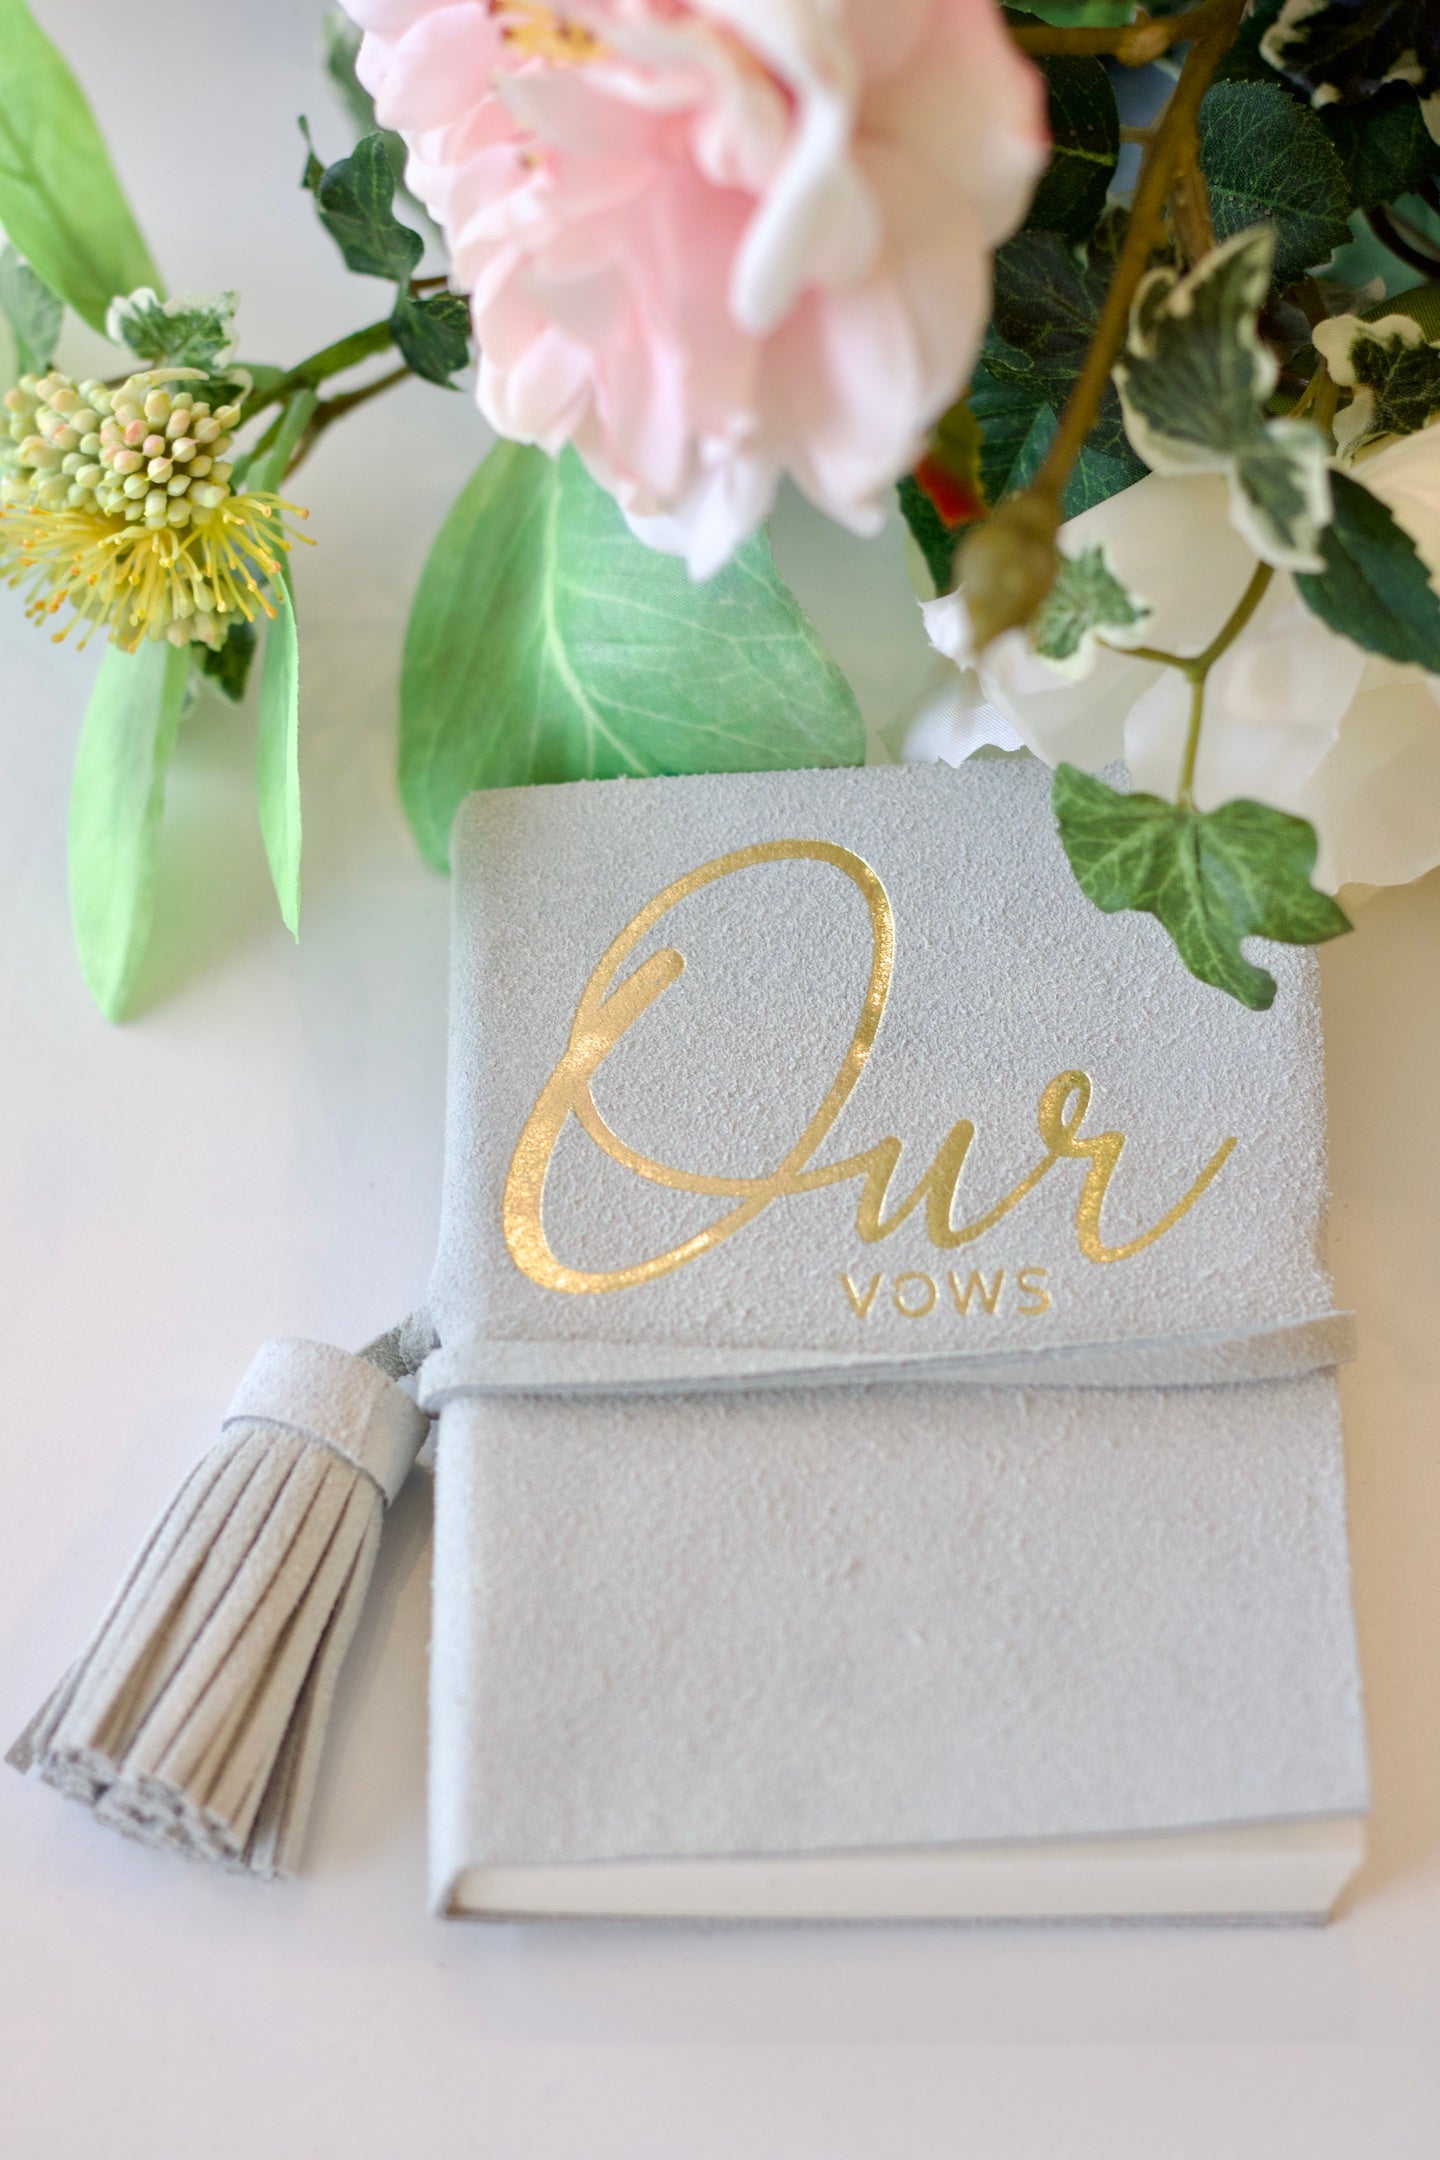 Vow Book - Ours